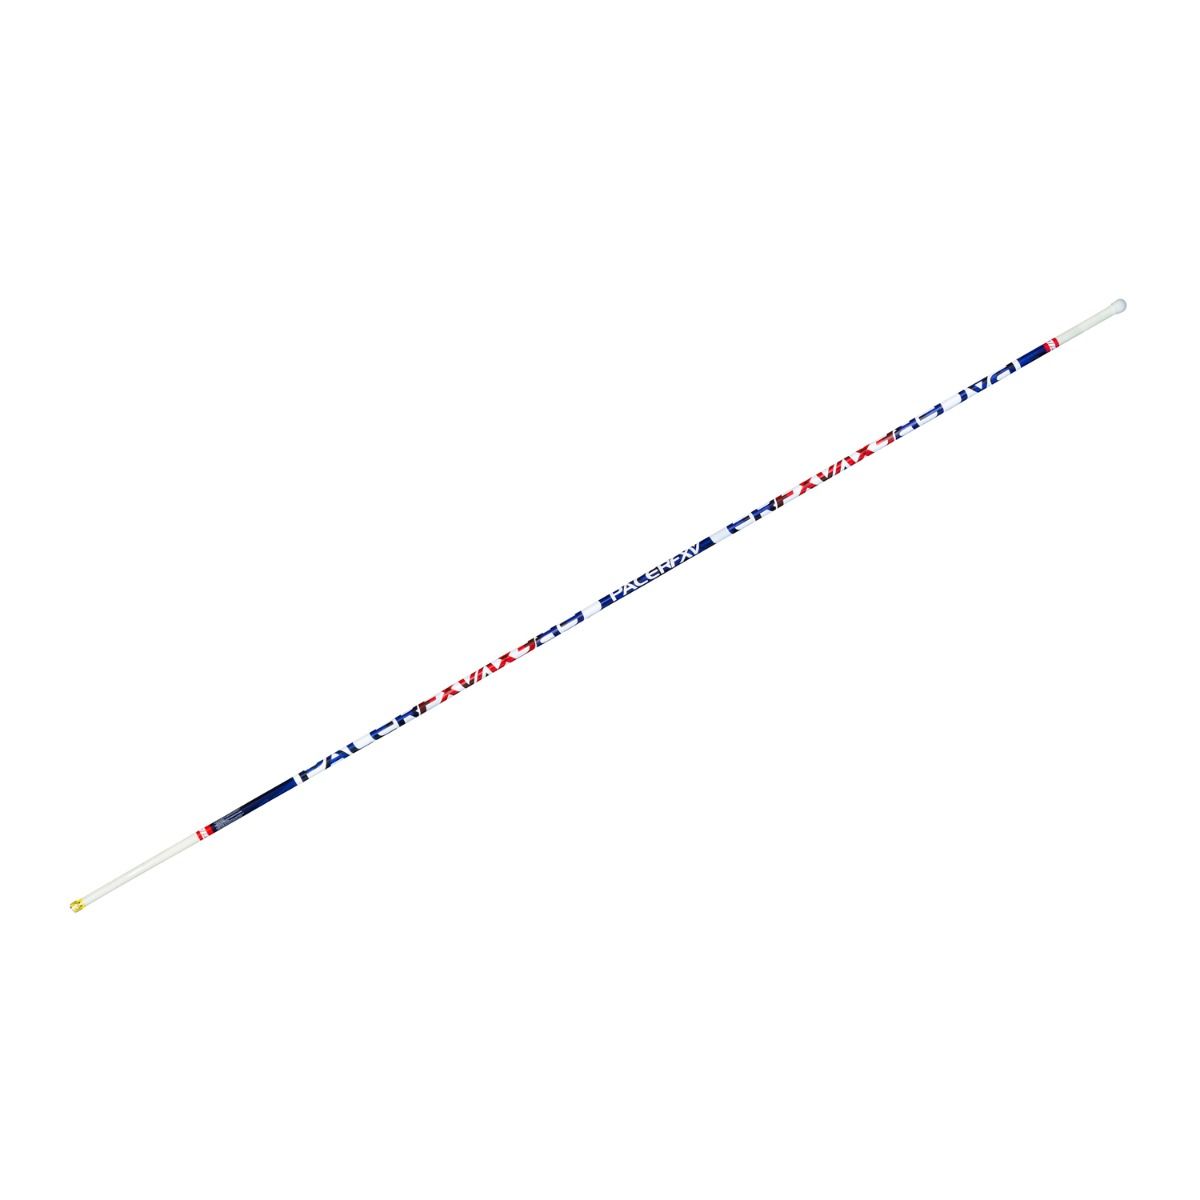 Gill PacerFXV 14' 6" Vaulting Pole